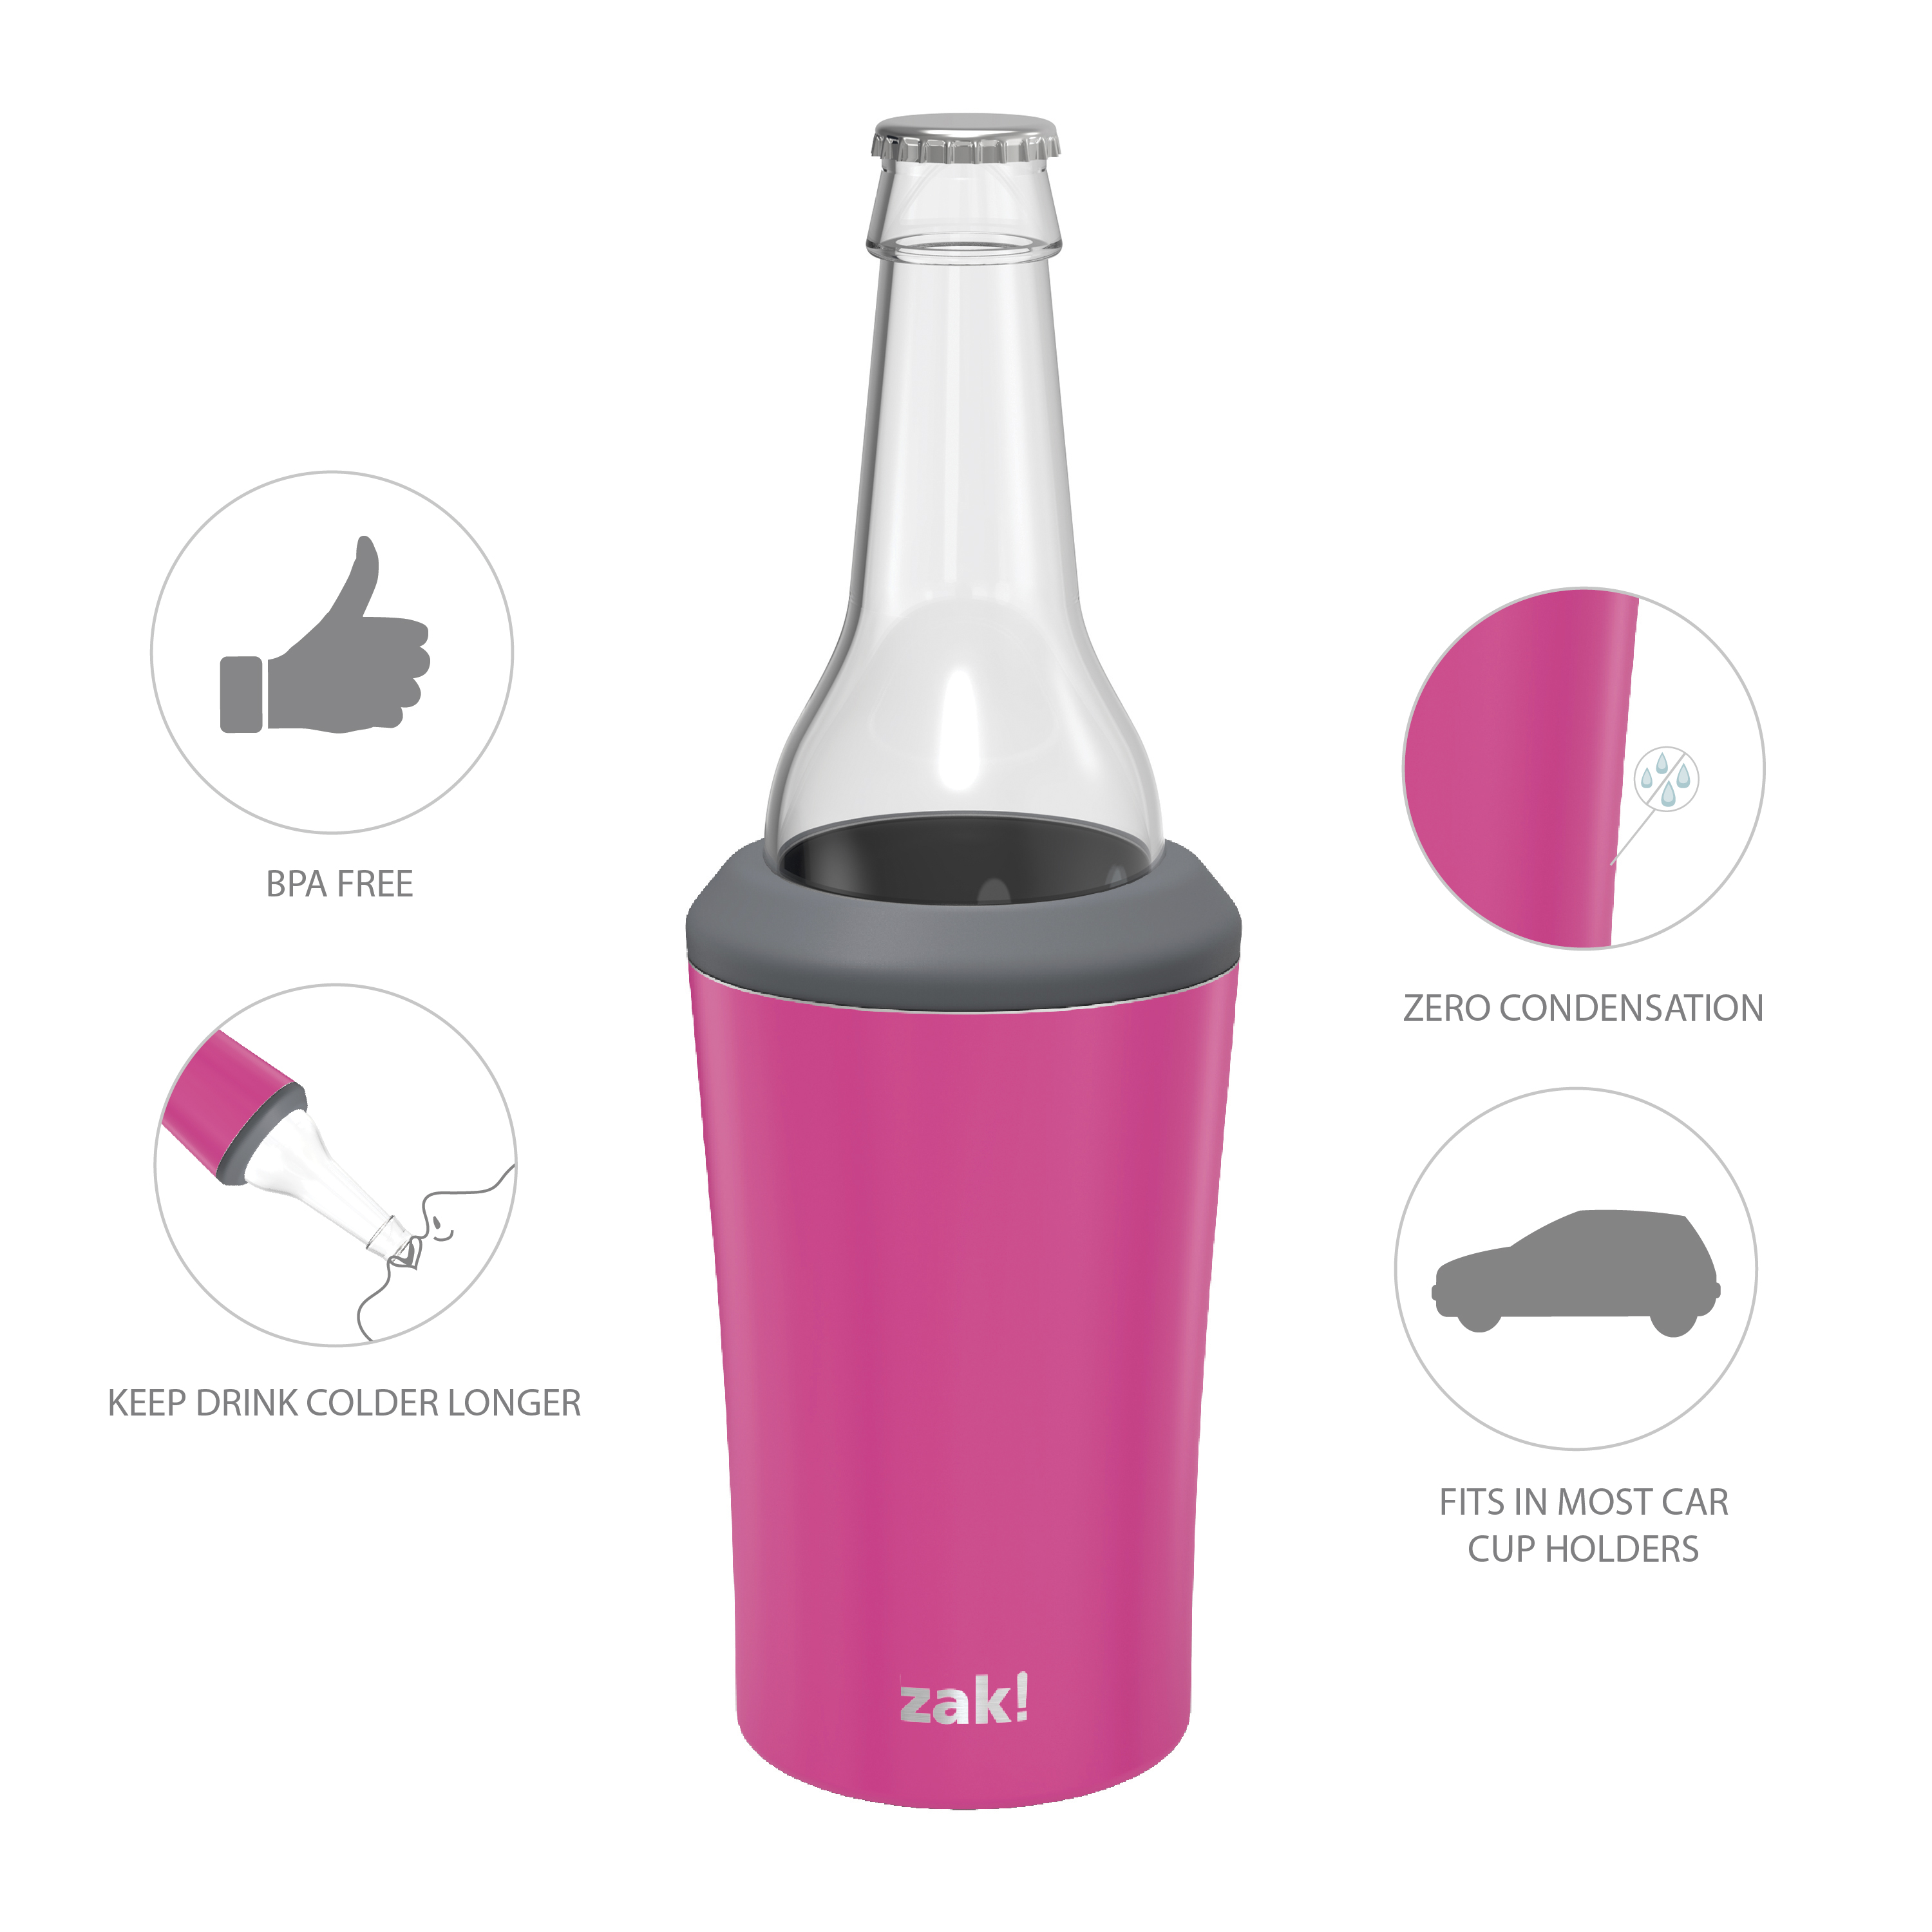 Zak Hydration 12 ounce Double Wall Stainless Steel Can and Bottle Cooler with Vacuum Insulation, Raspberry slideshow image 10